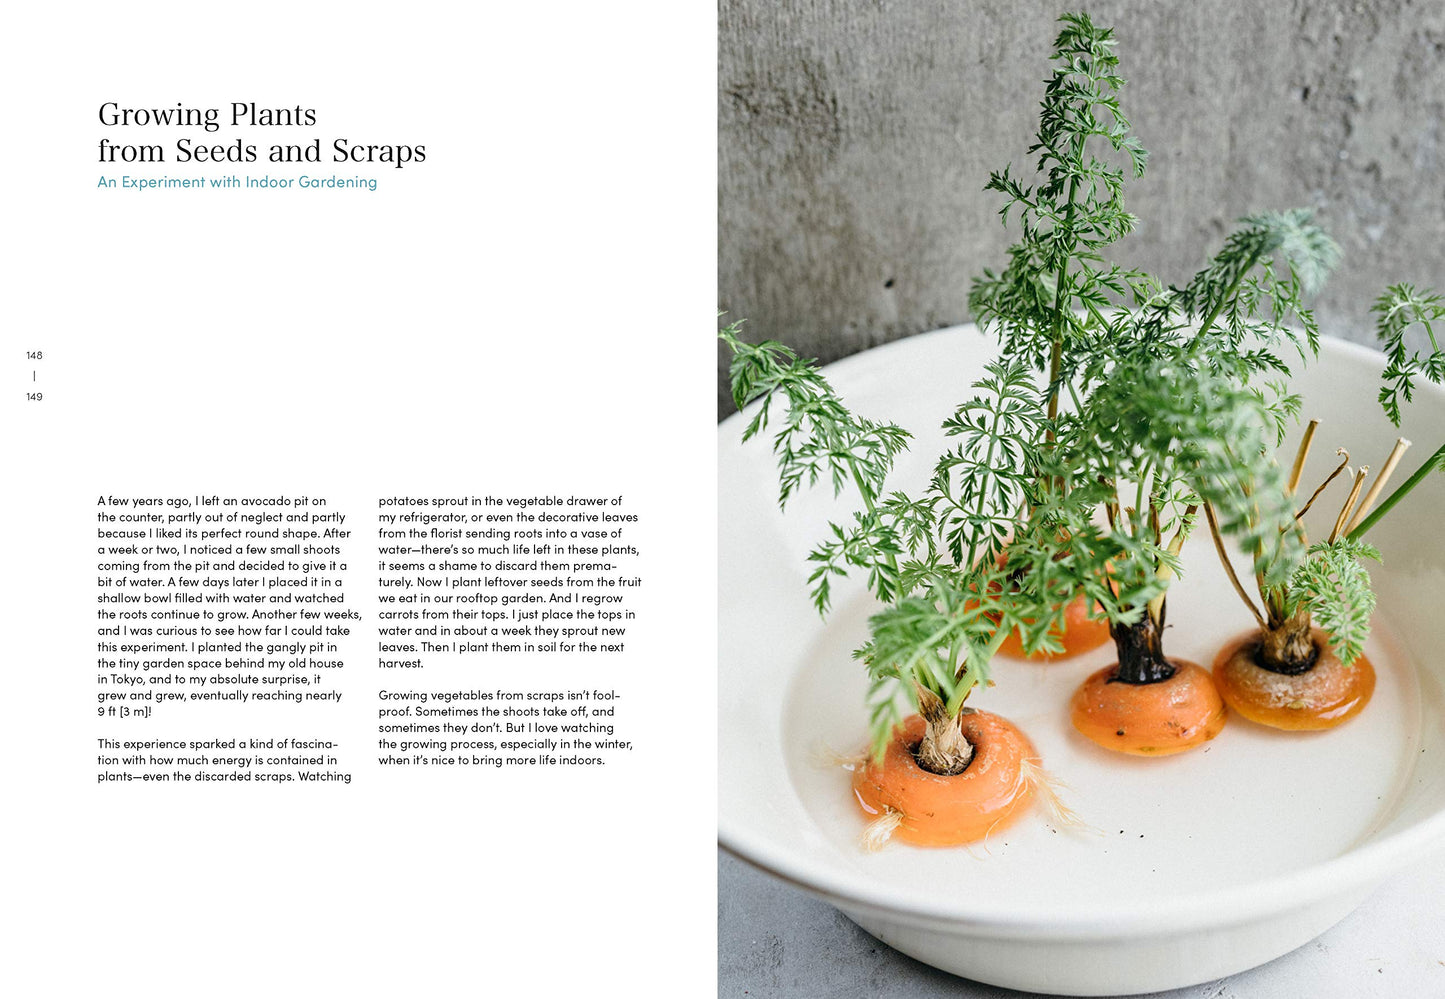 Simplicity at Home : Japanese Rituals, Recipes, and Arrangements for Thoughtful Living